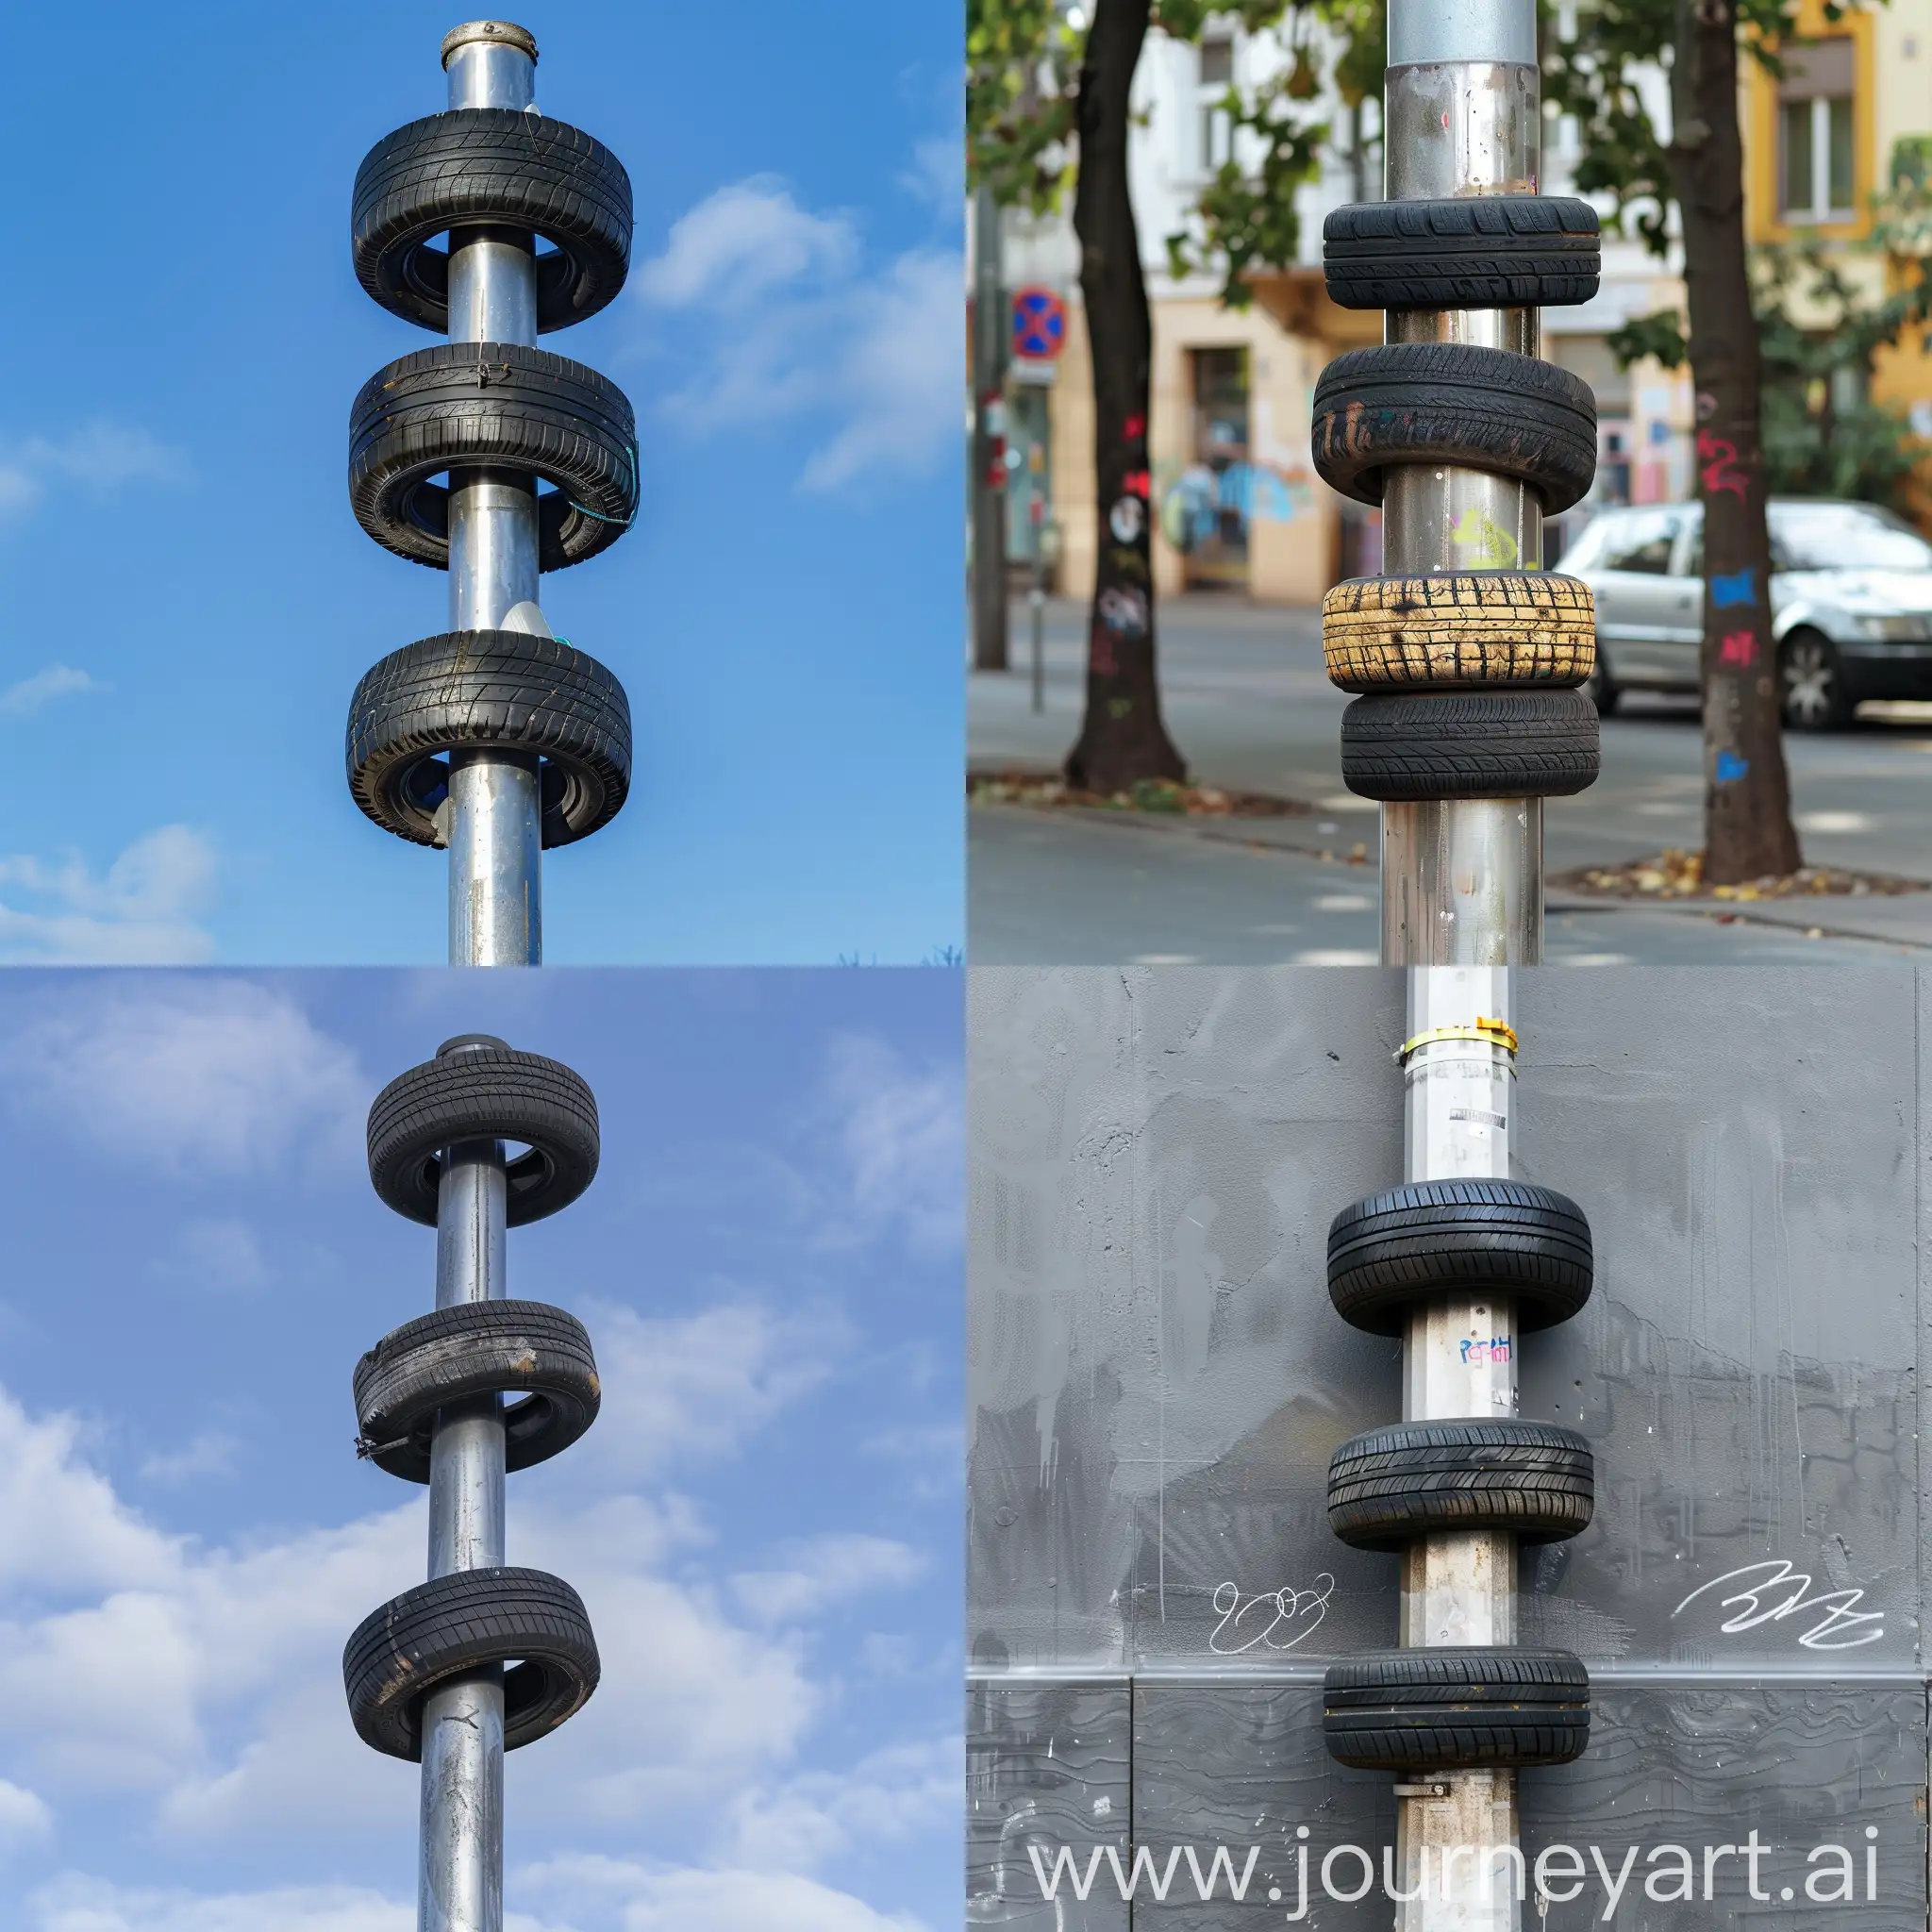 image of a metallic thin street light pole dressed with three tyres to prevent kids from running into it and getting hurt